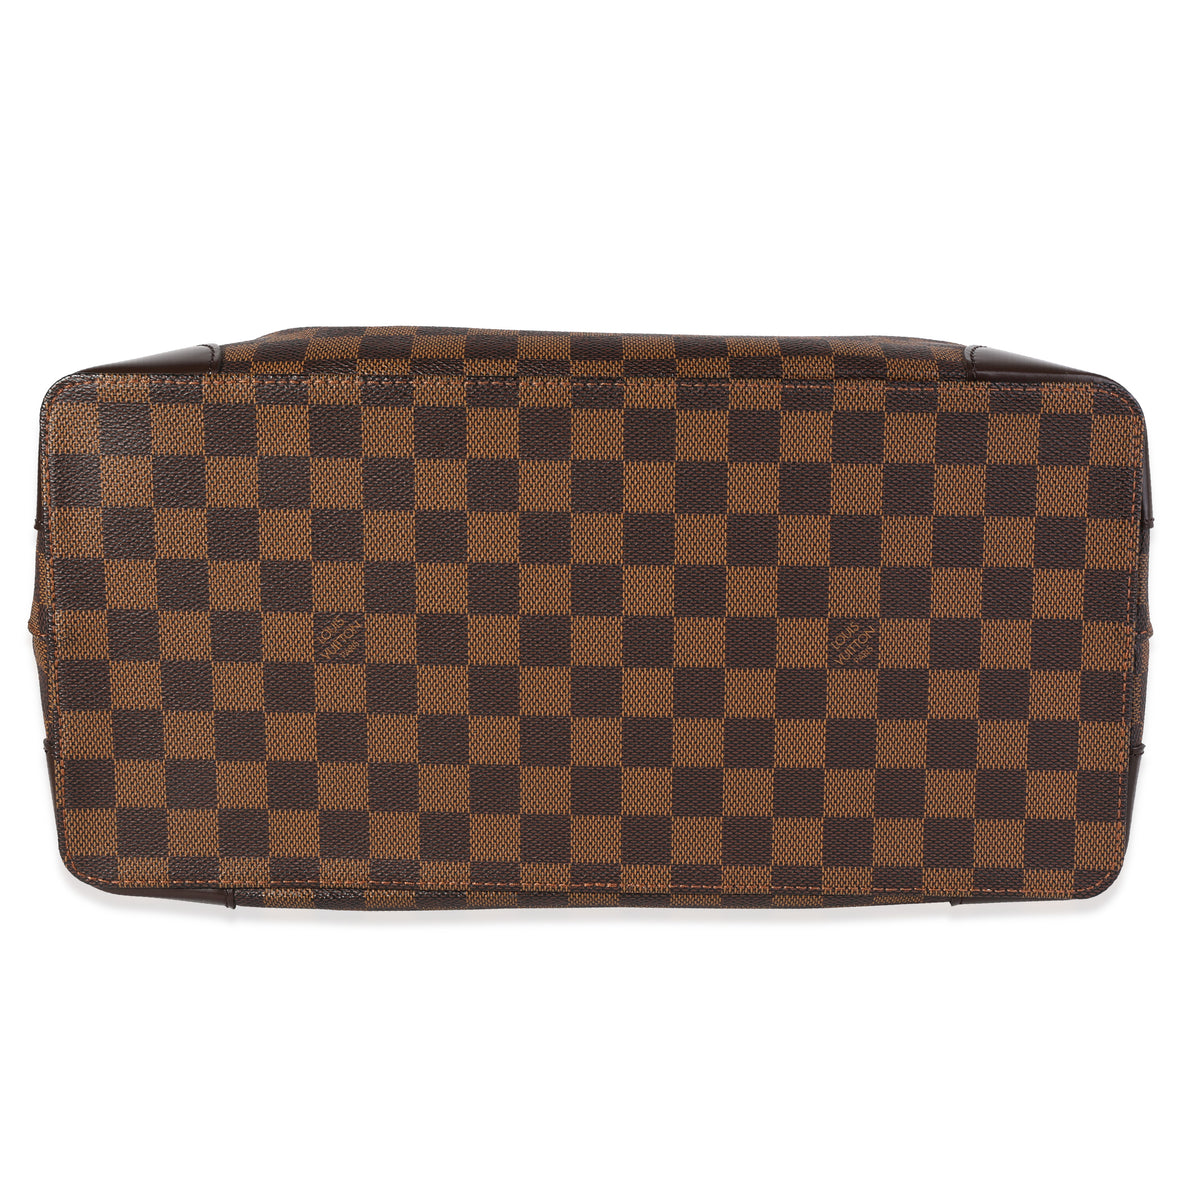 ♡Louis Vuitton Hampstead MM Damier Ebene♡, Review & Why I'm Selling